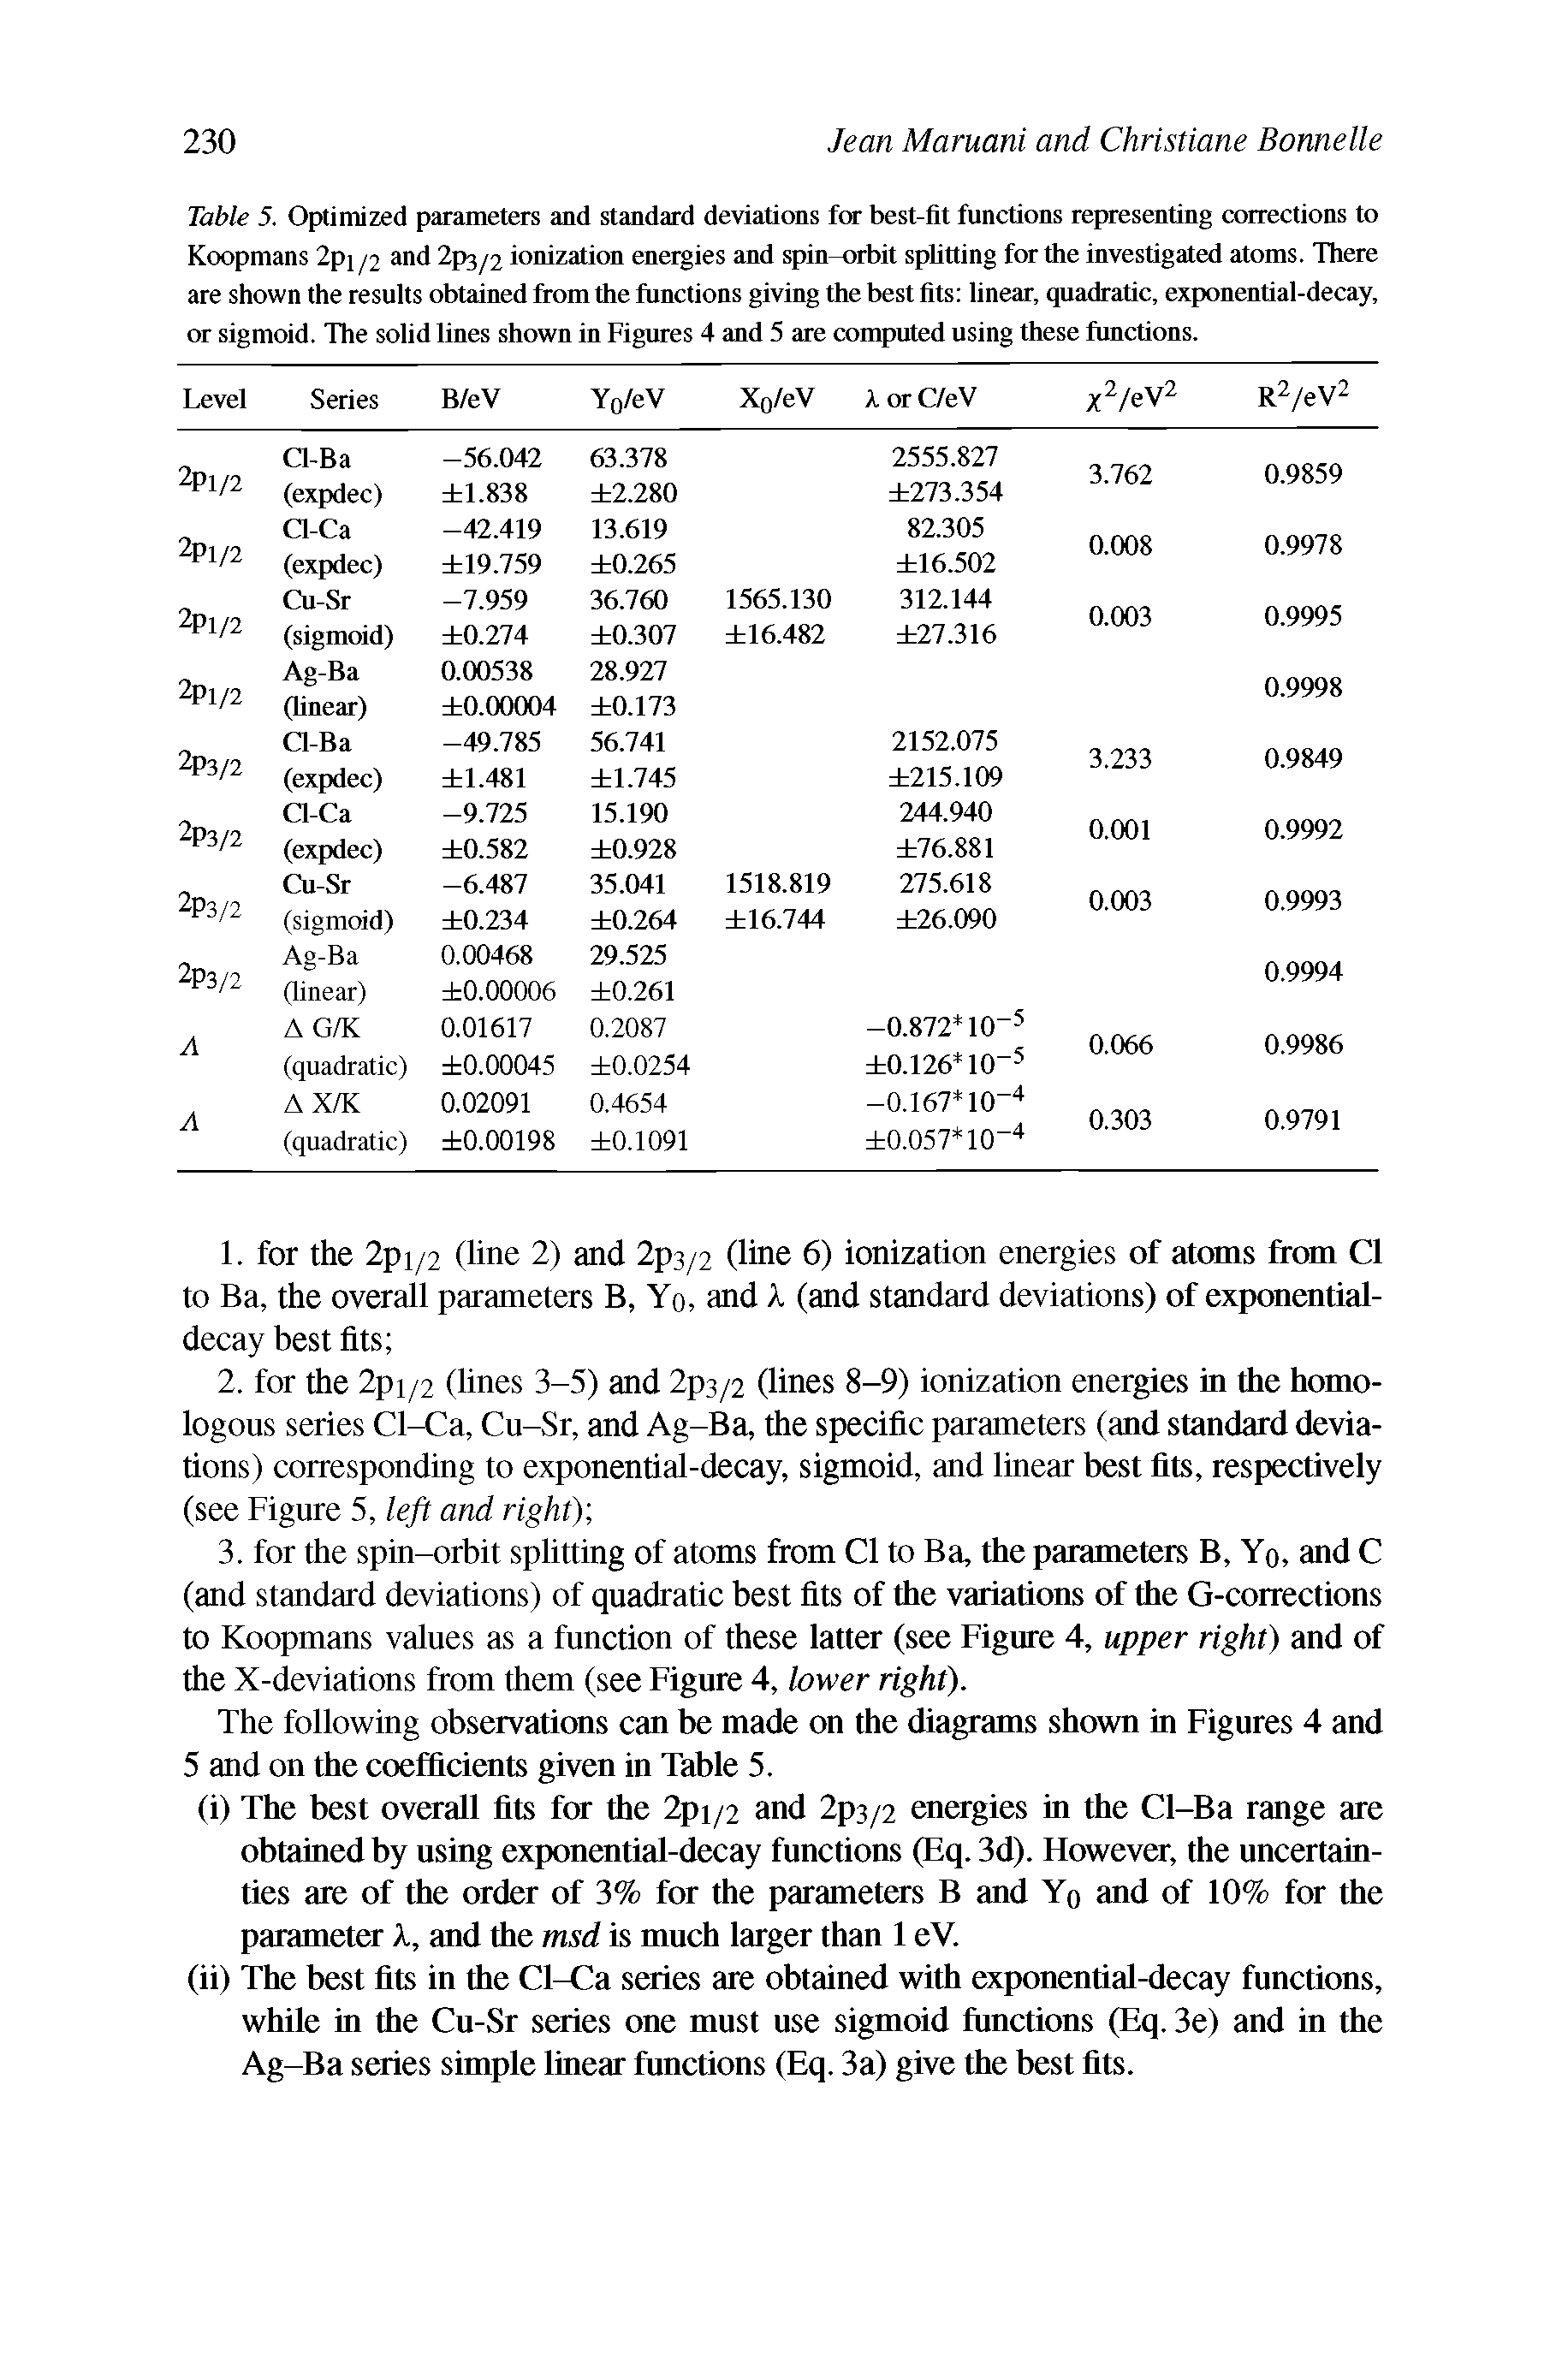 Table 5. Optimized parameters and standard deviations for best-fit functions representing corrections to Koopmans 2pi p and 2p3/2 ionization energies and spin-orbit splitting for the investigated atoms. There are shown the results obtained from the functions giving the best fits linear, quadratic, exponential-decay, or sigmoid. The solid lines shown in Figures 4 and 5 are computed using these functions.